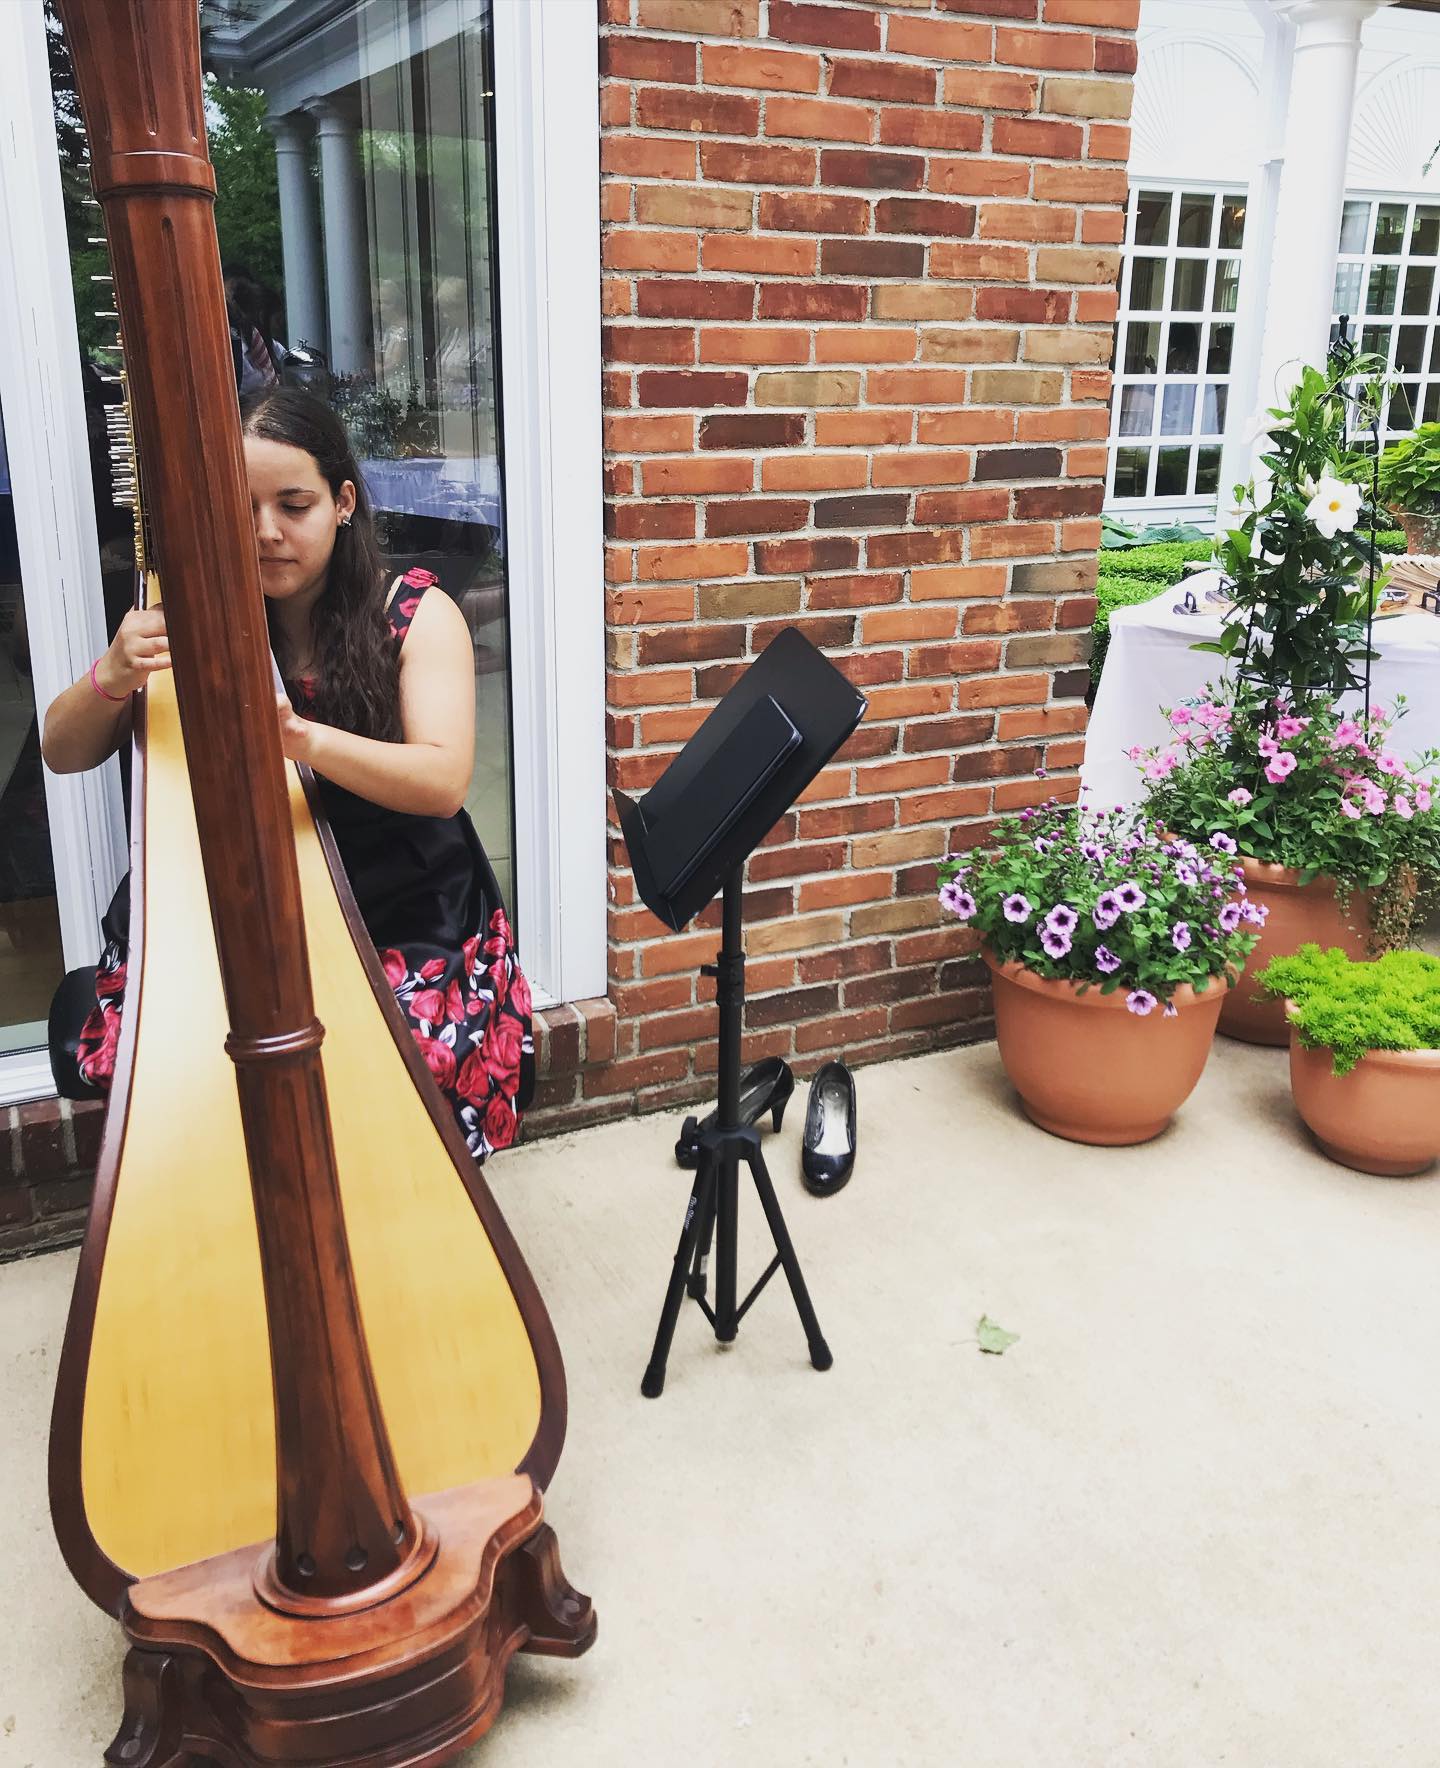 Maia Playing Her Harp At A Wedding on a patio outdoors. Hire a Harpist in Anderson, Muncie, and Kokomo Weddings